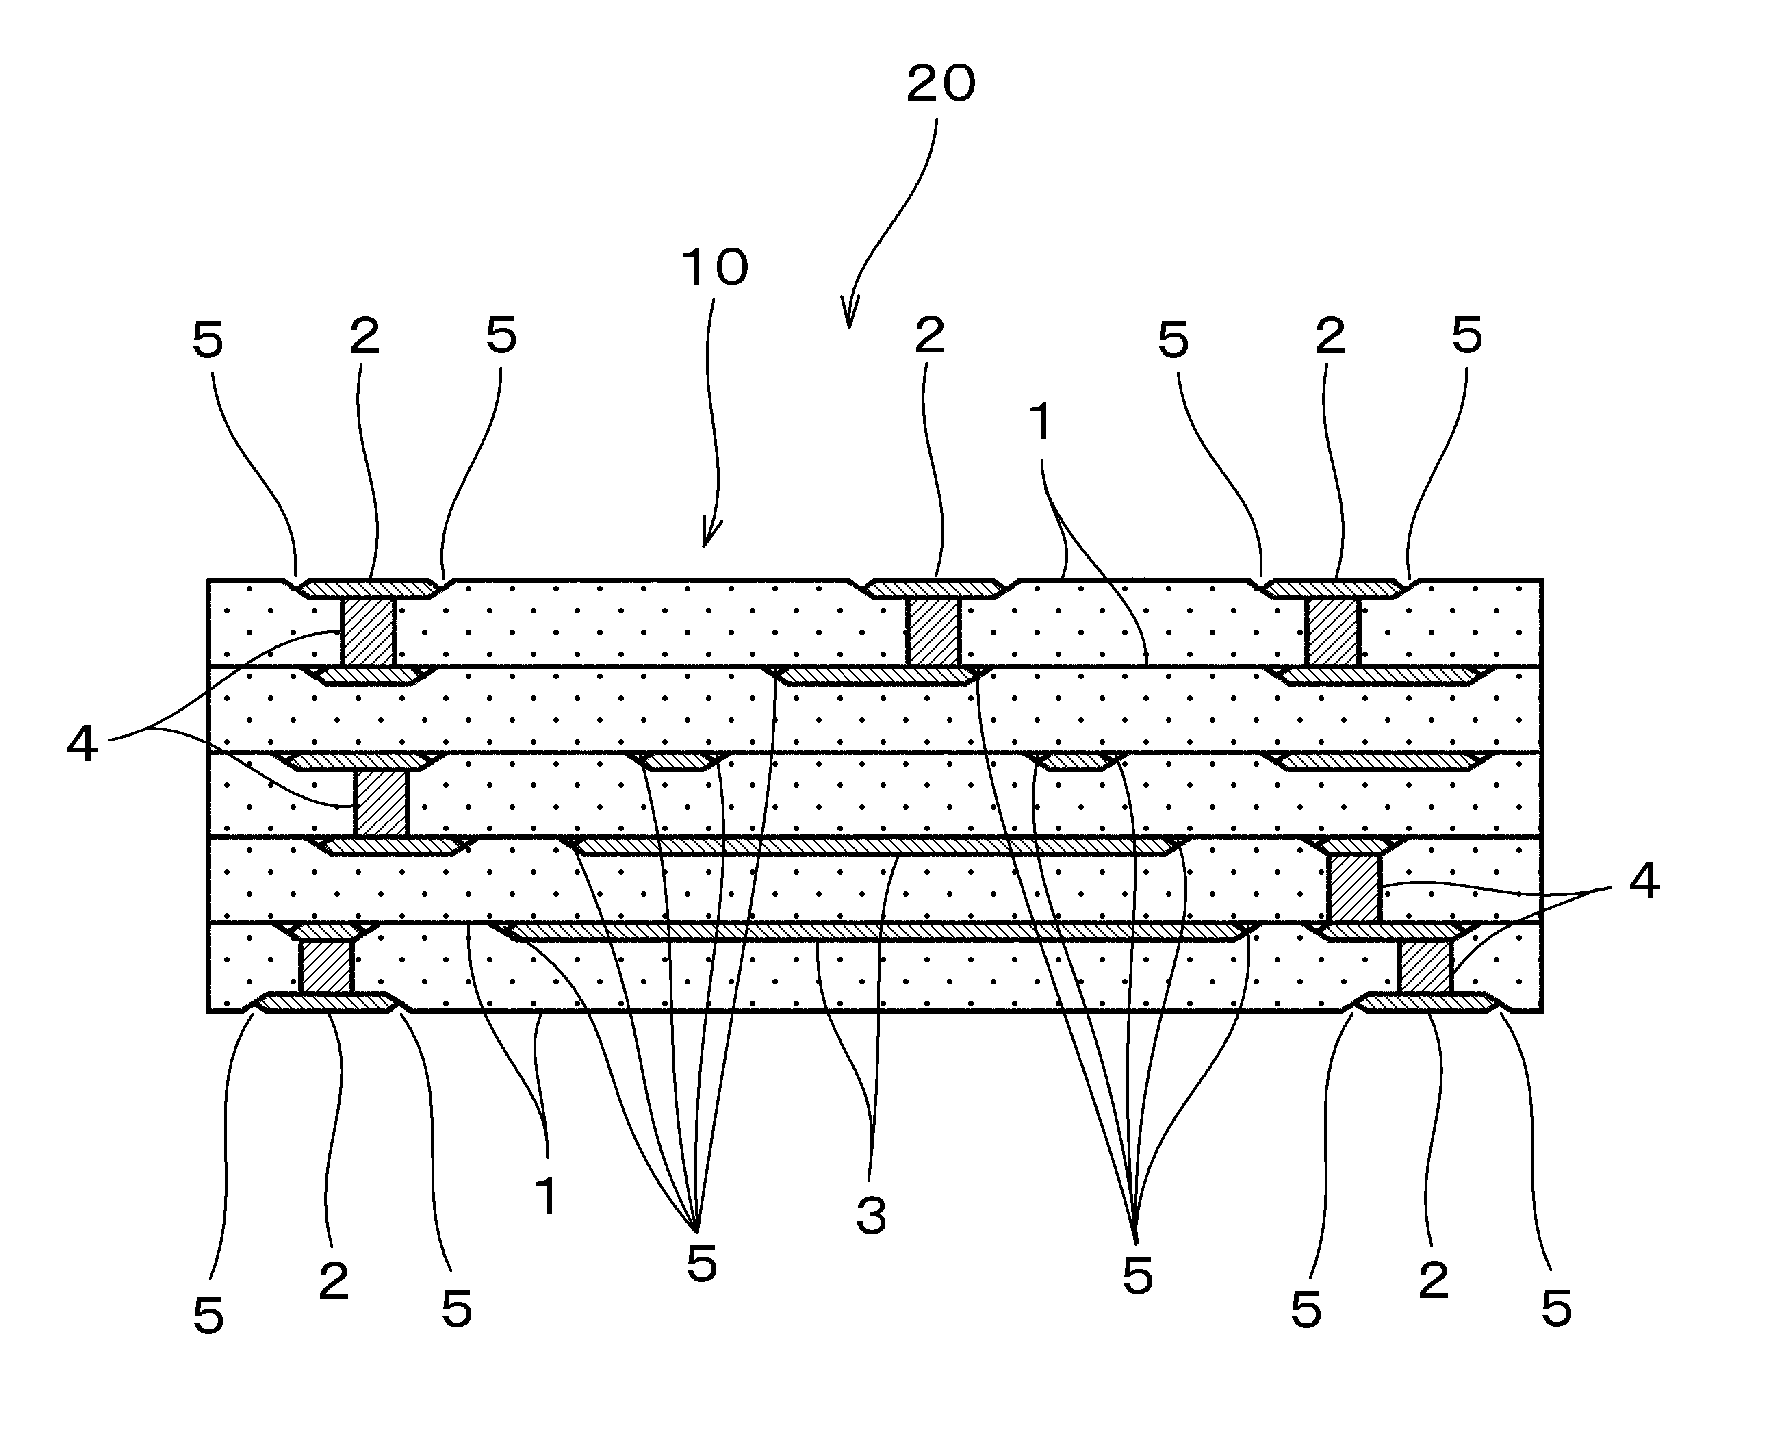 Ceramic multilayer substrate and manufacturing method therefor